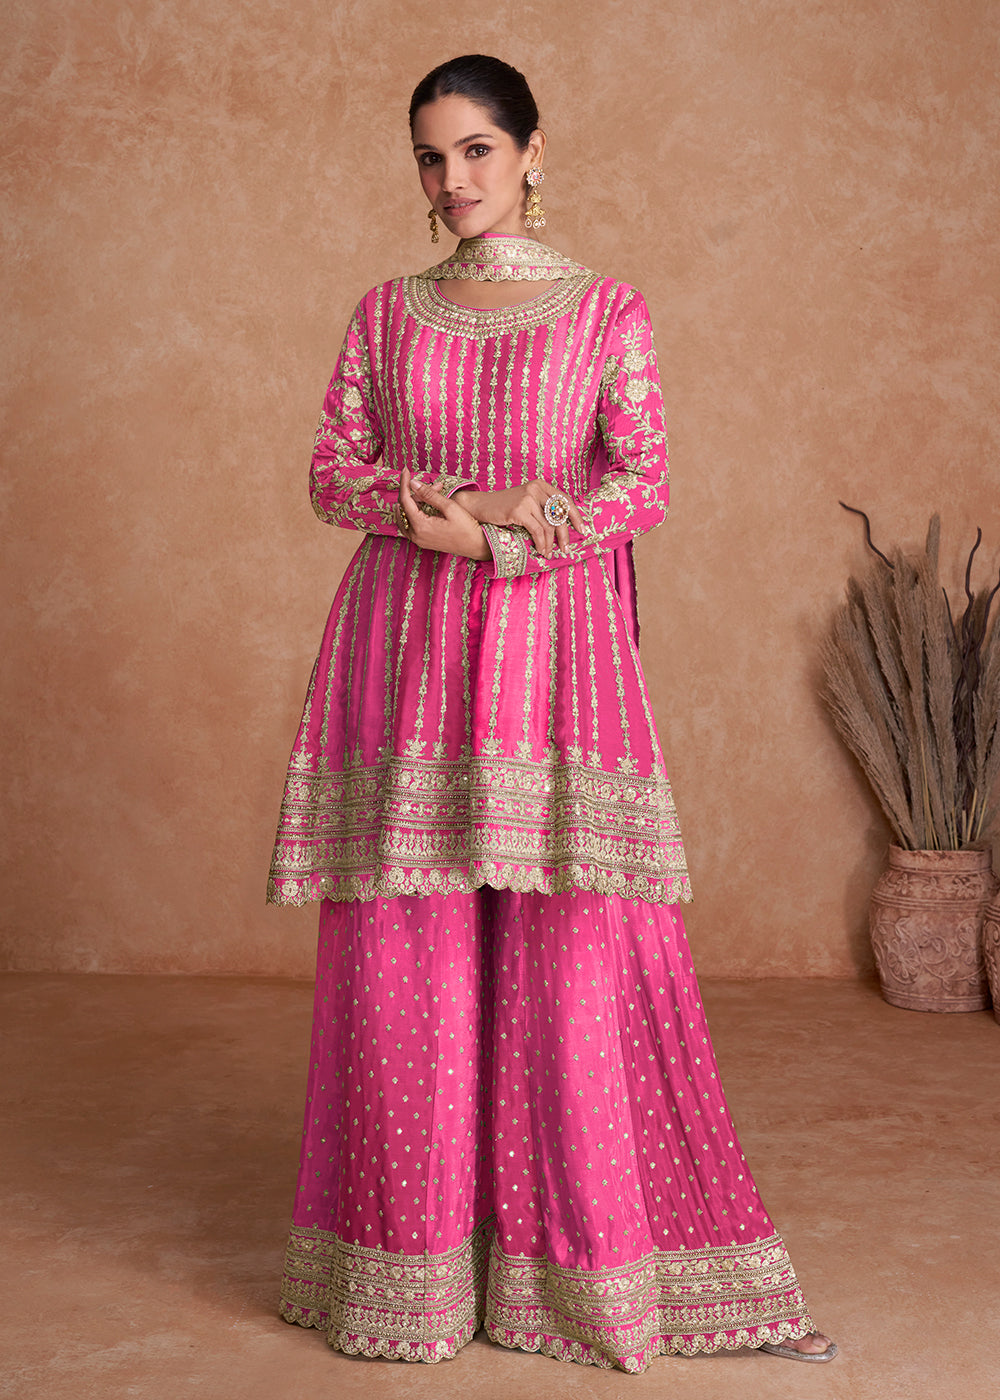 Shop Now Traditional Pink Embroidered Wedding & Reception Wear Gharara Suit Online at Empress Clothing in USA, UK, Canada, Italy & Worldwide.